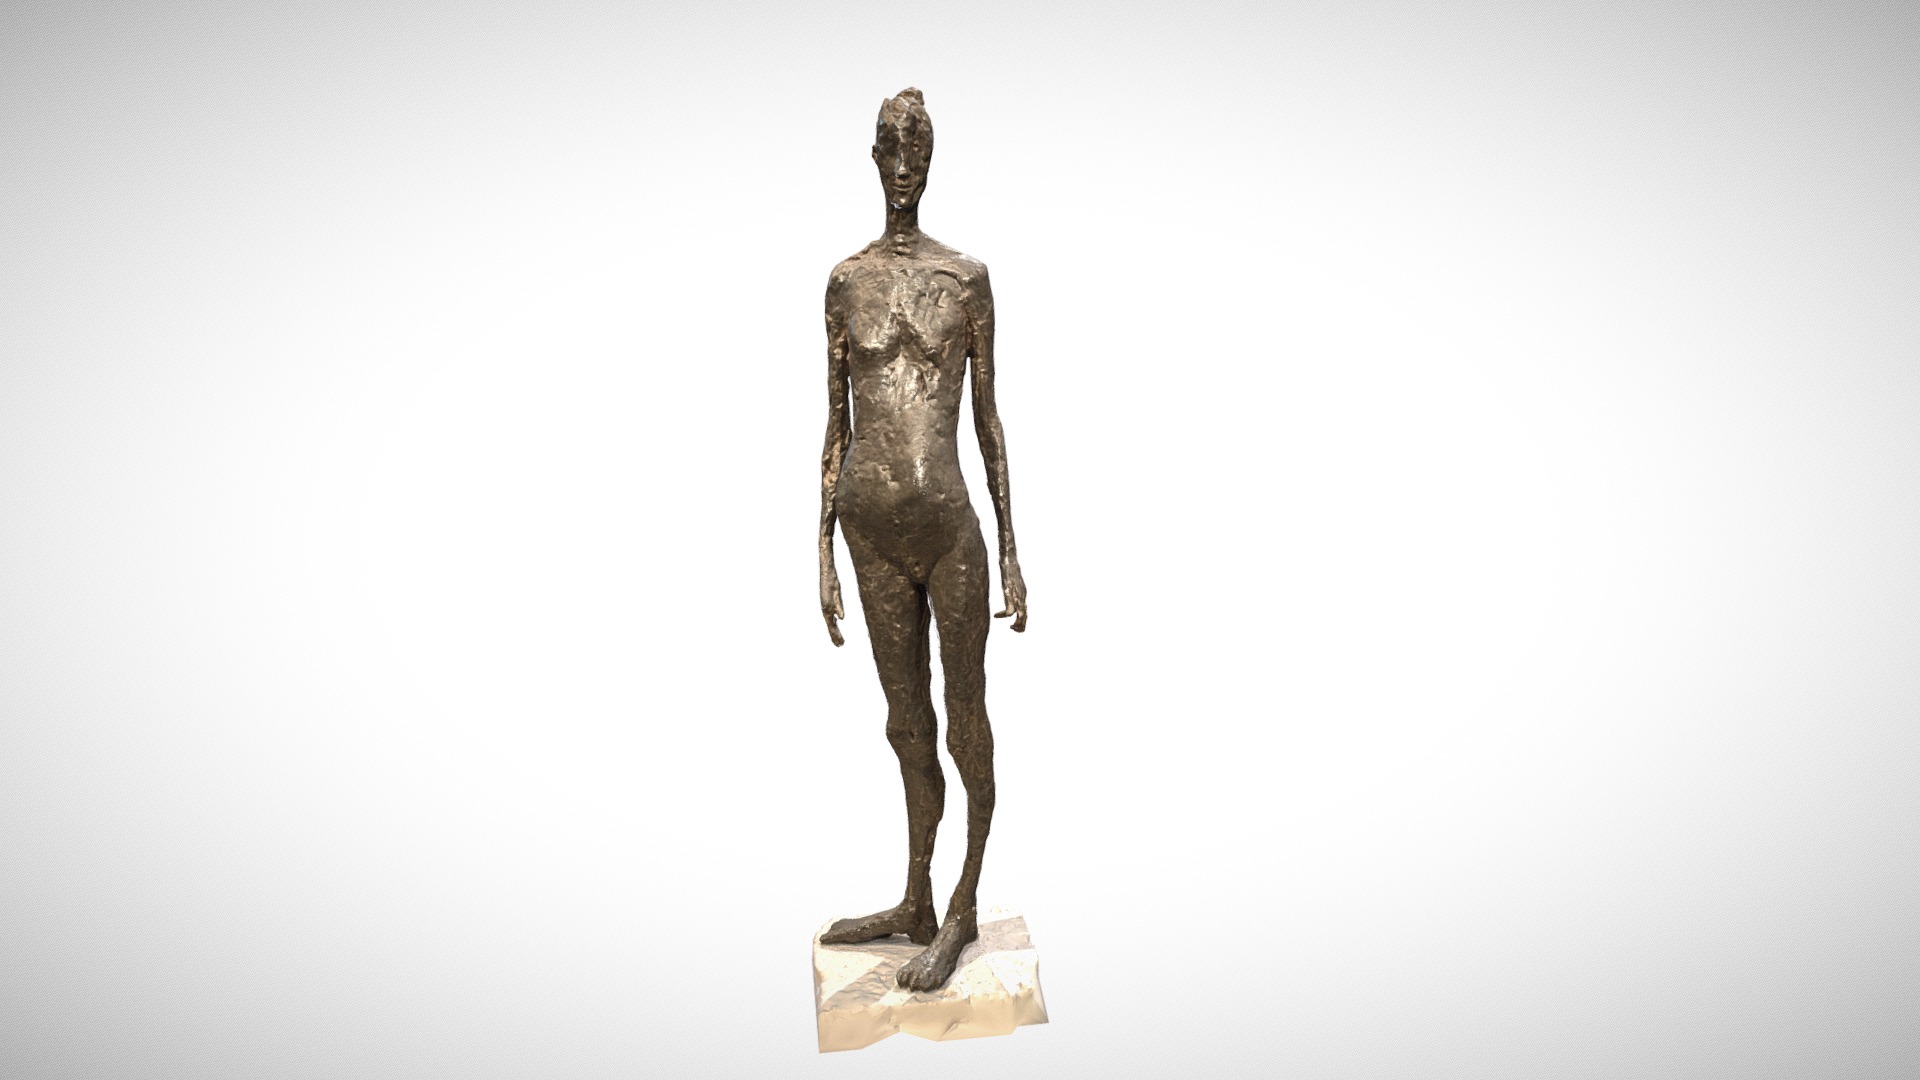 3D model La feuille by Germaine Richier - This is a 3D model of the La feuille by Germaine Richier. The 3D model is about a statue of a person.